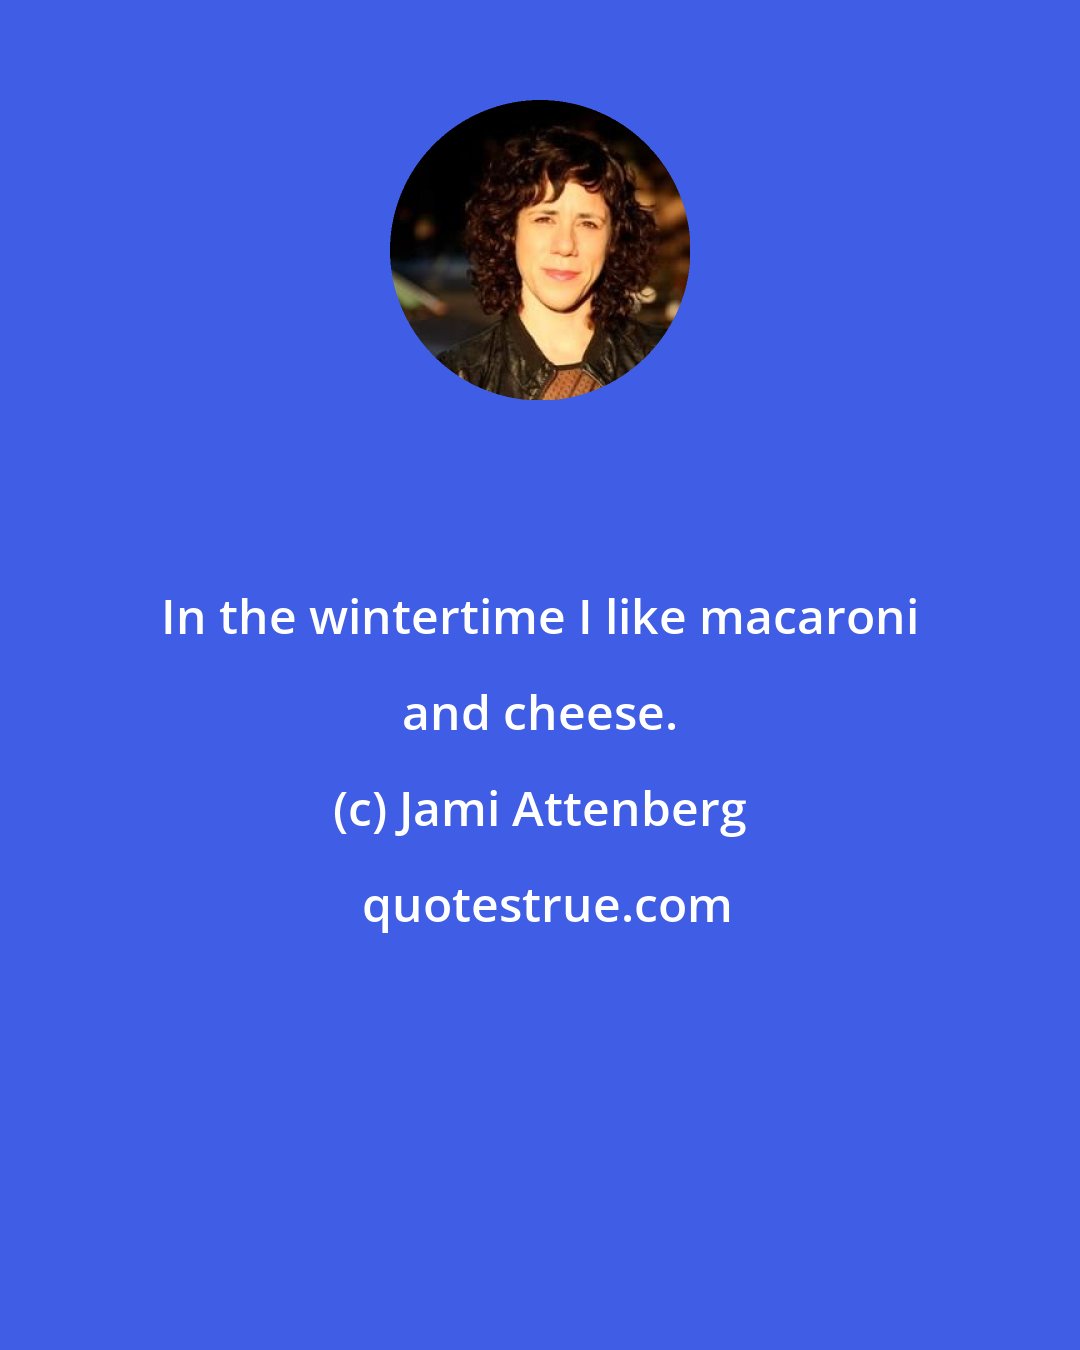 Jami Attenberg: In the wintertime I like macaroni and cheese.